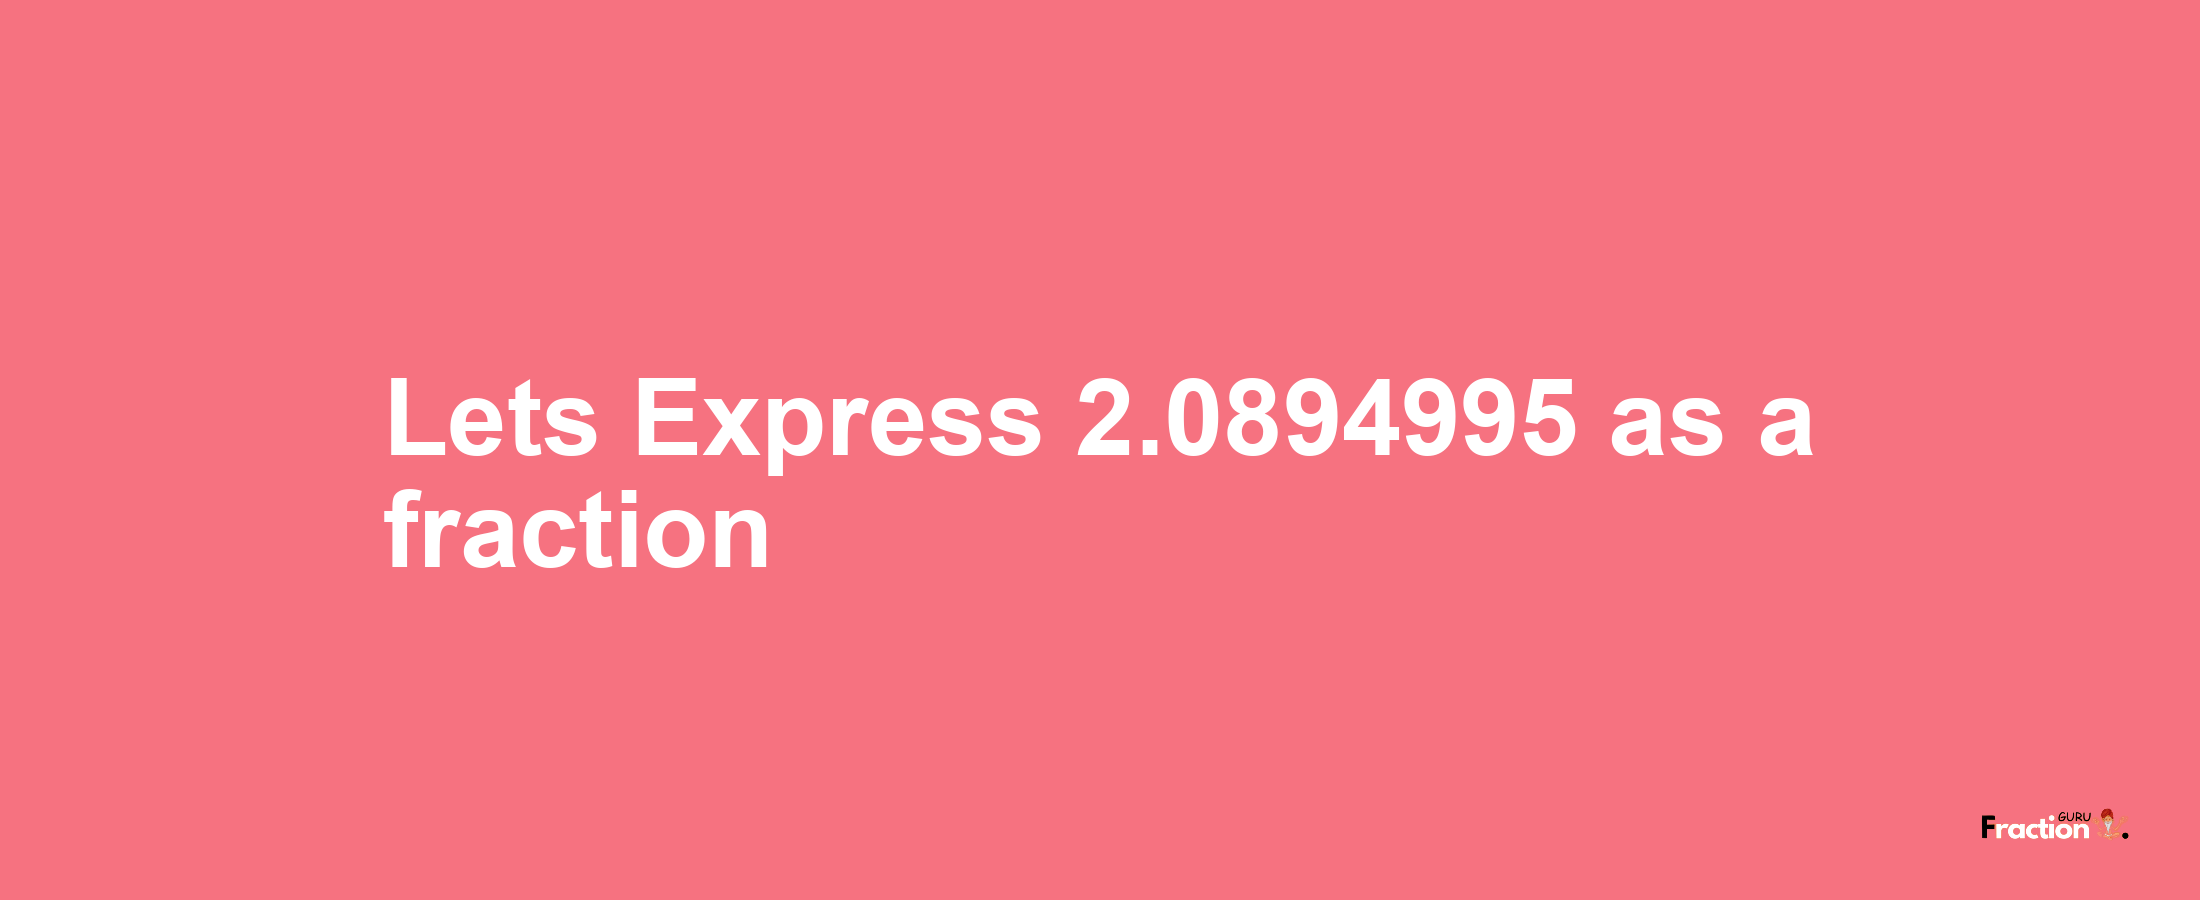 Lets Express 2.0894995 as afraction